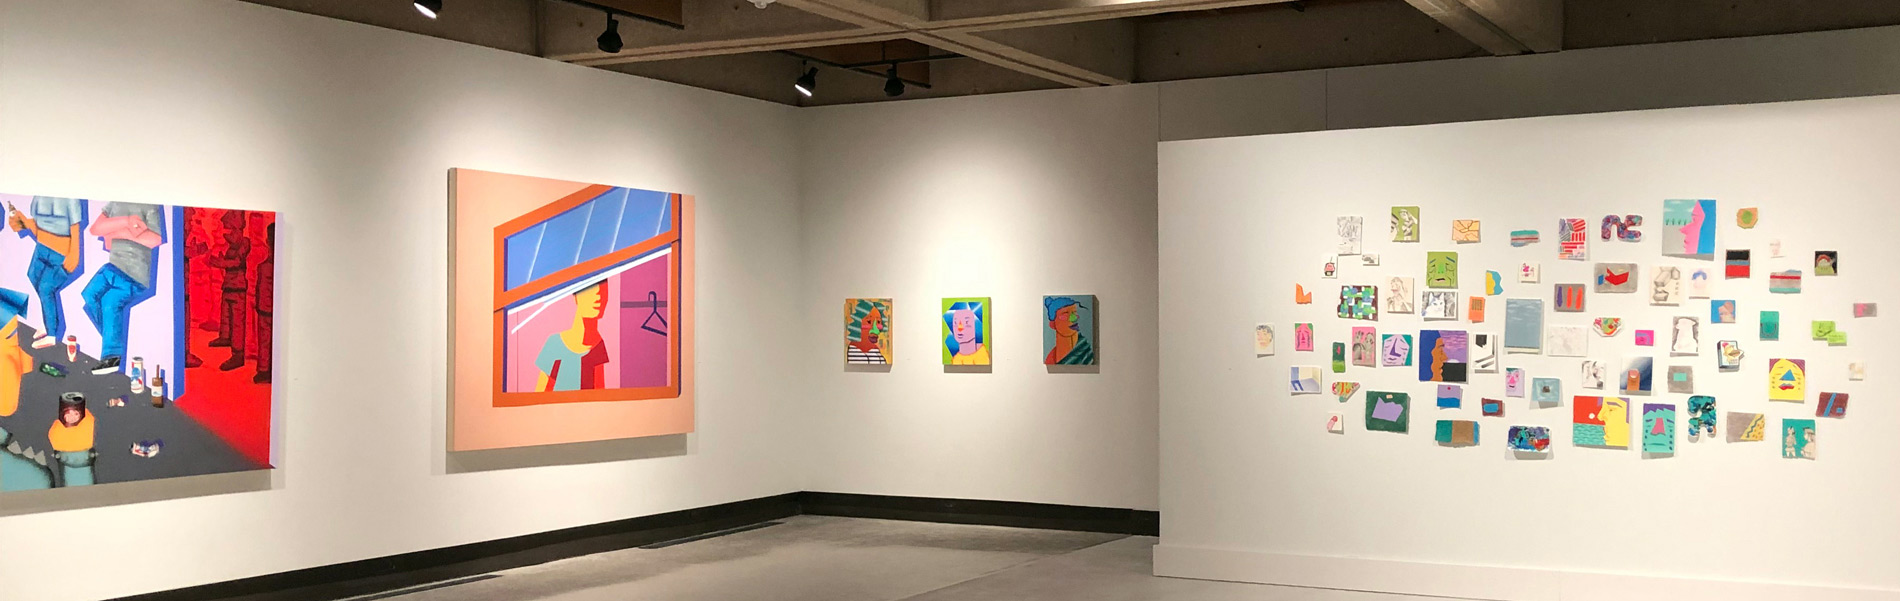 Installations of various paintings in the Cora Stafford Gallery